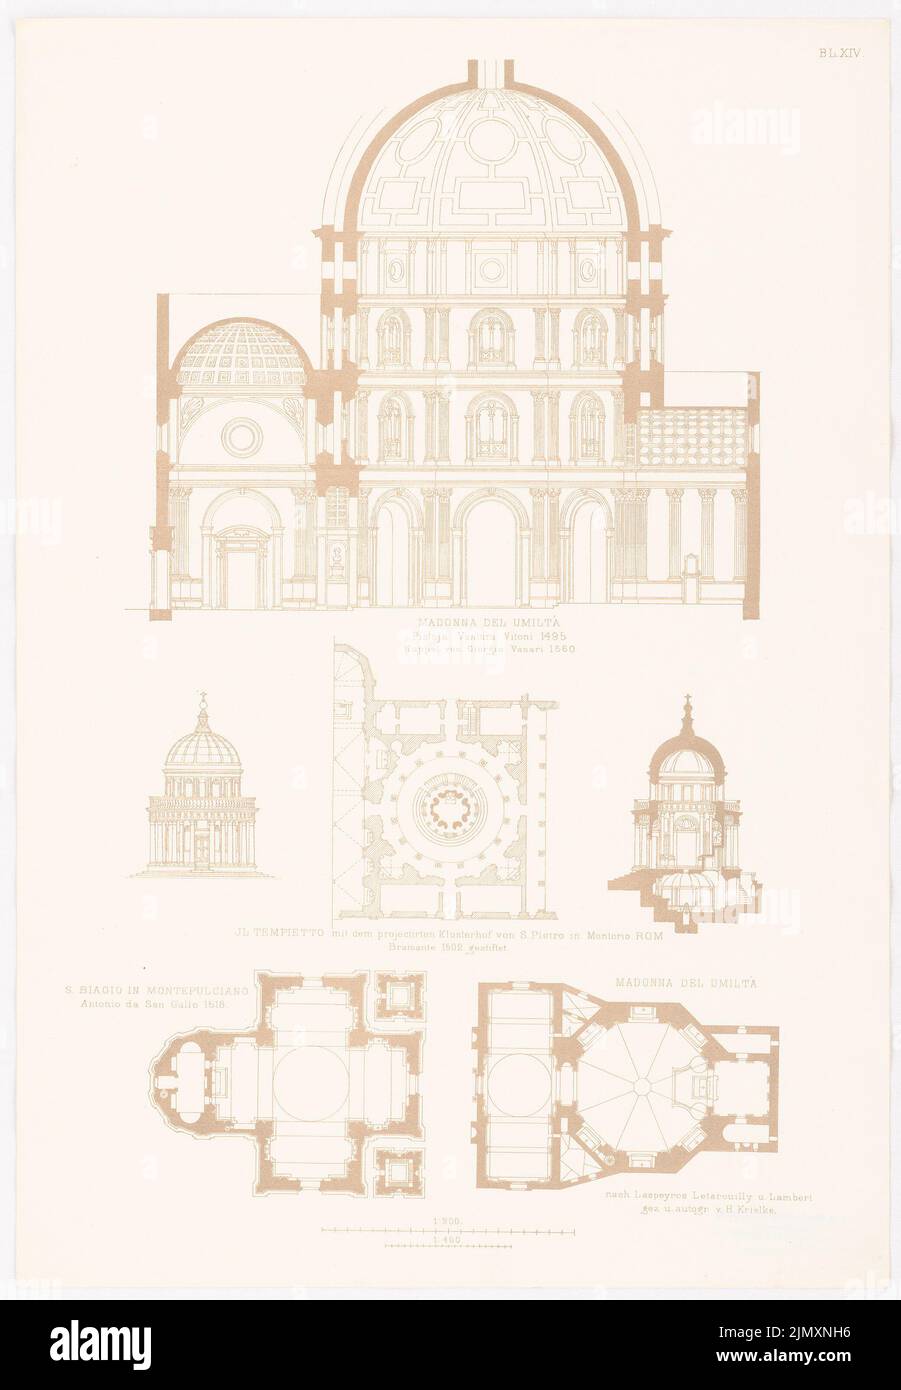 N.N., Madonna del Umilta in Pistoja. Il Tempieto in Rome. S. Bagio in Montepulciano. (From: architecture d. Renaissance in Italy and Spain, ed. V. Signaus (1875-1875): cross-section, floor plan Madonna, view, floor plan, cross-section IL Tempieto, floor plan S. Bagio. Pressure on paper, 52.2 x 36.2 cm (including scan edges) Stock Photo